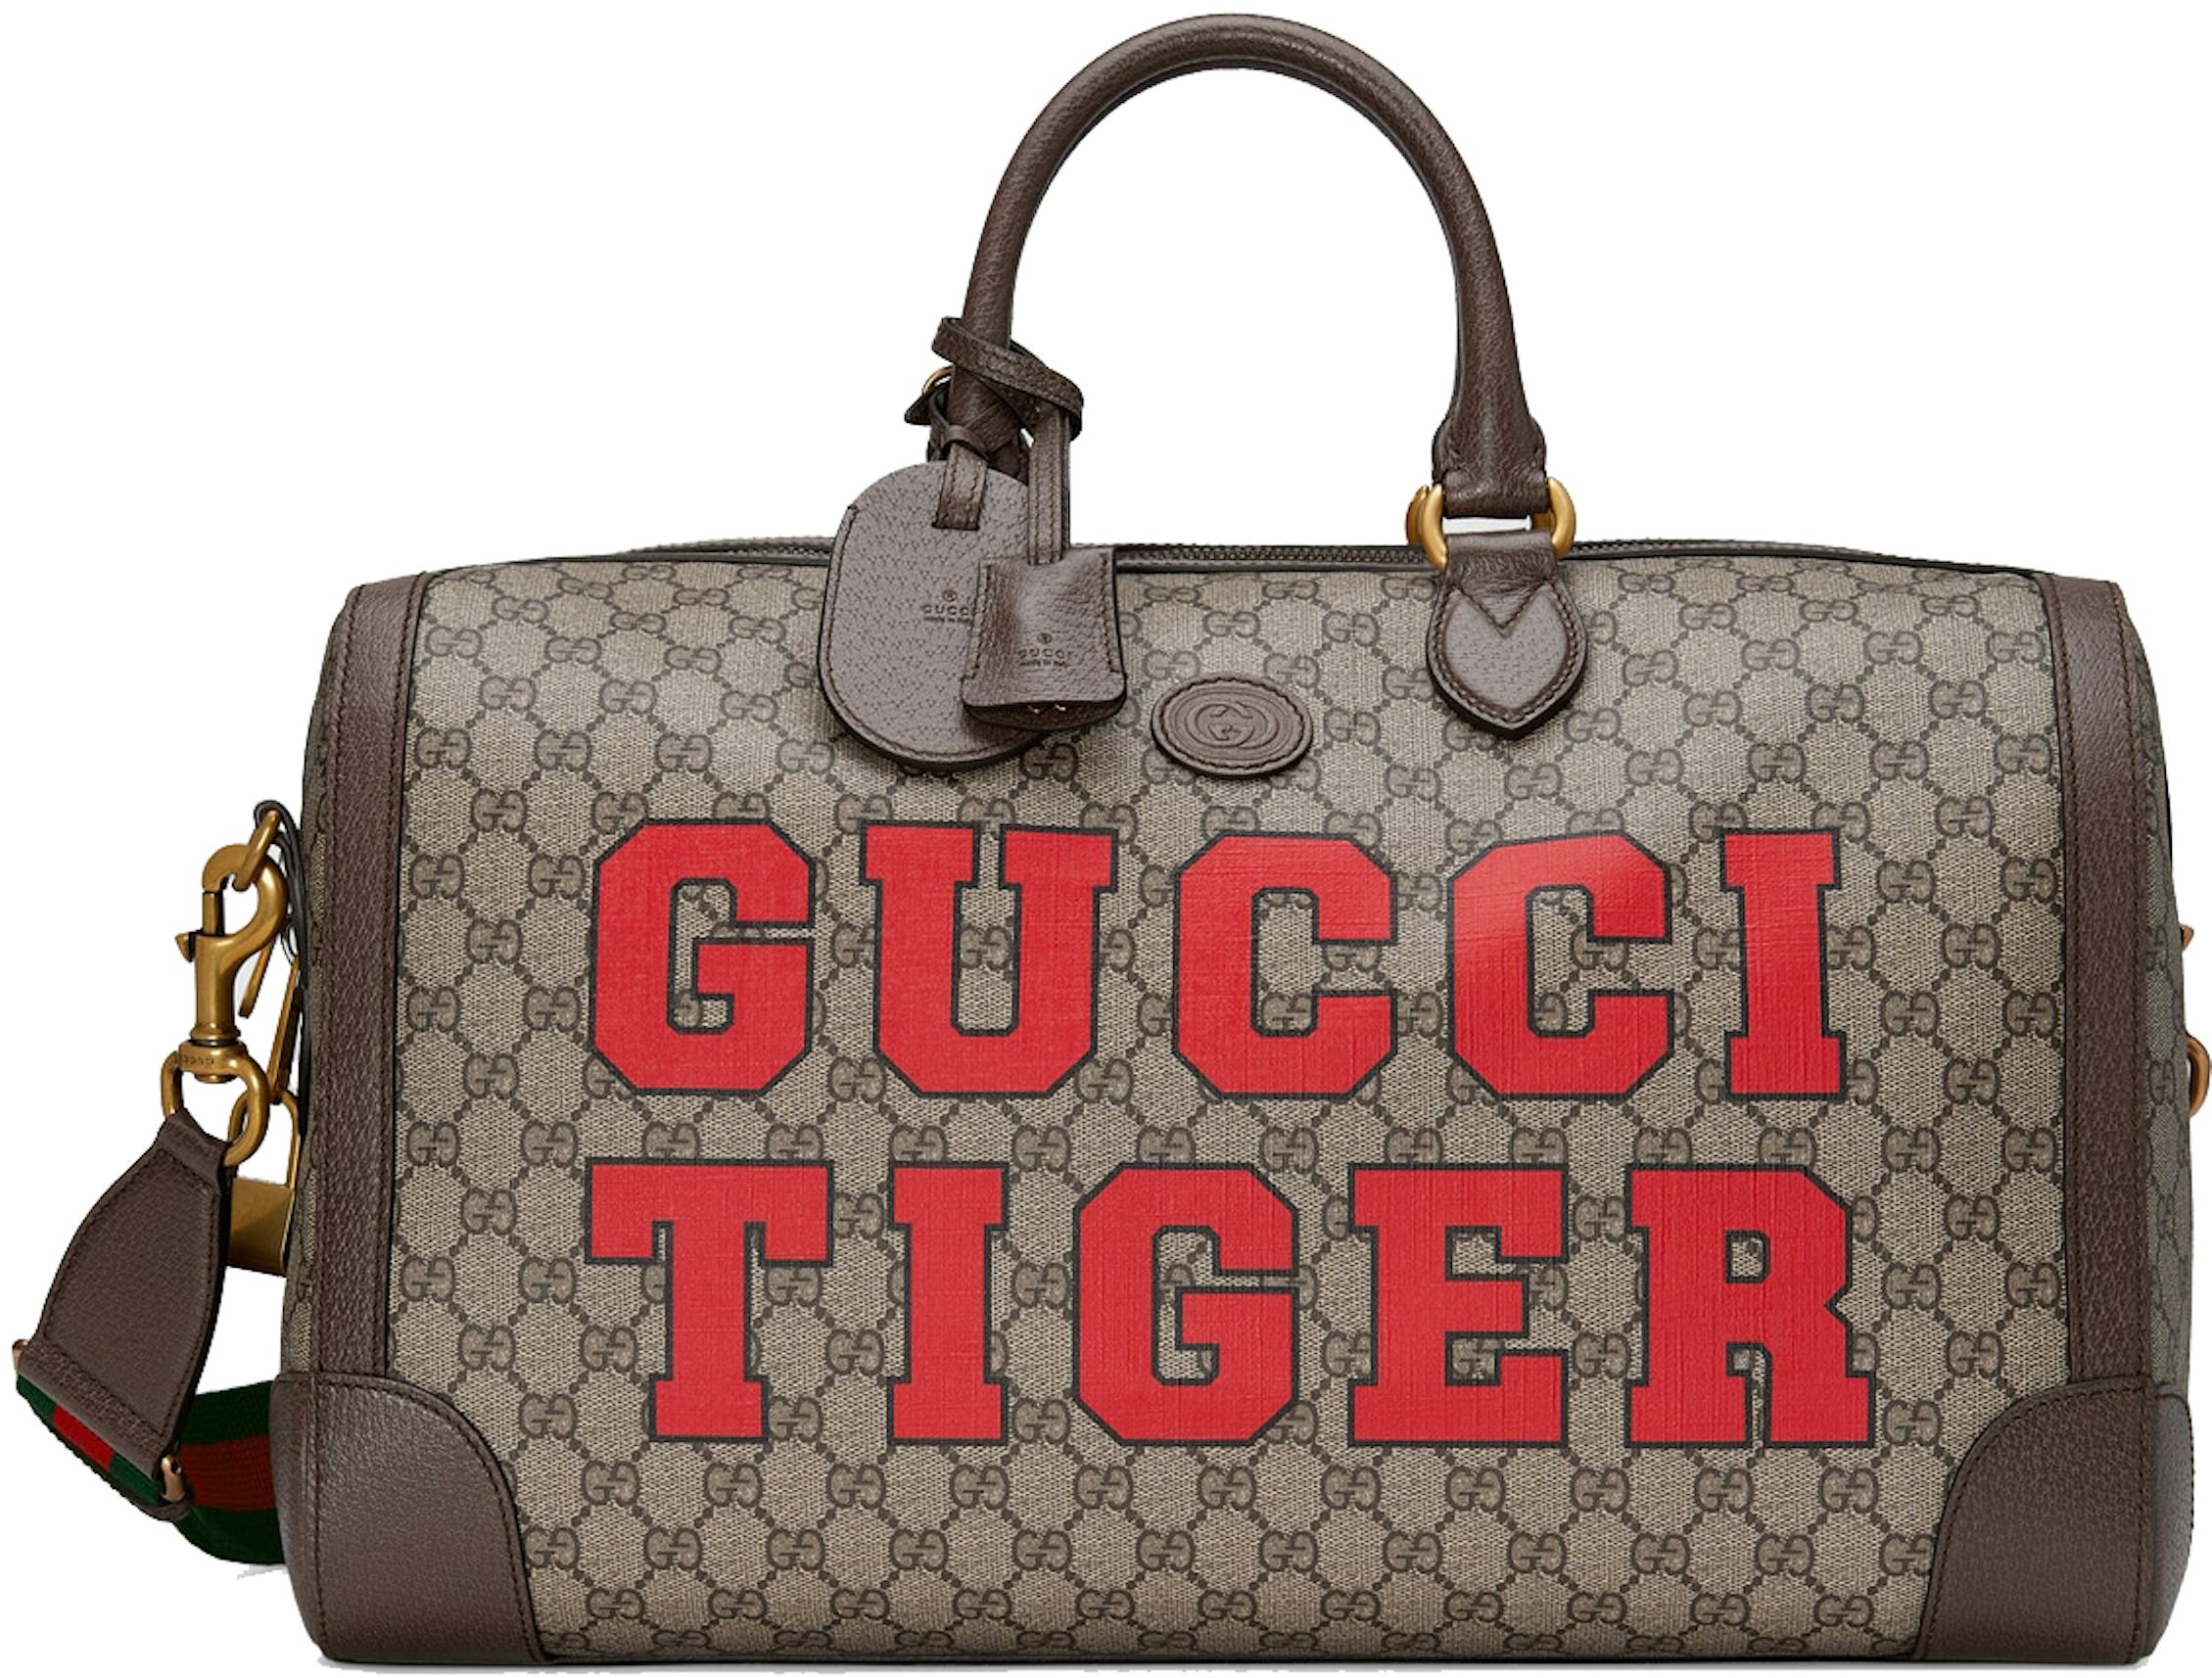 GG Supreme Small Carry On Suitcase in Beige - Gucci